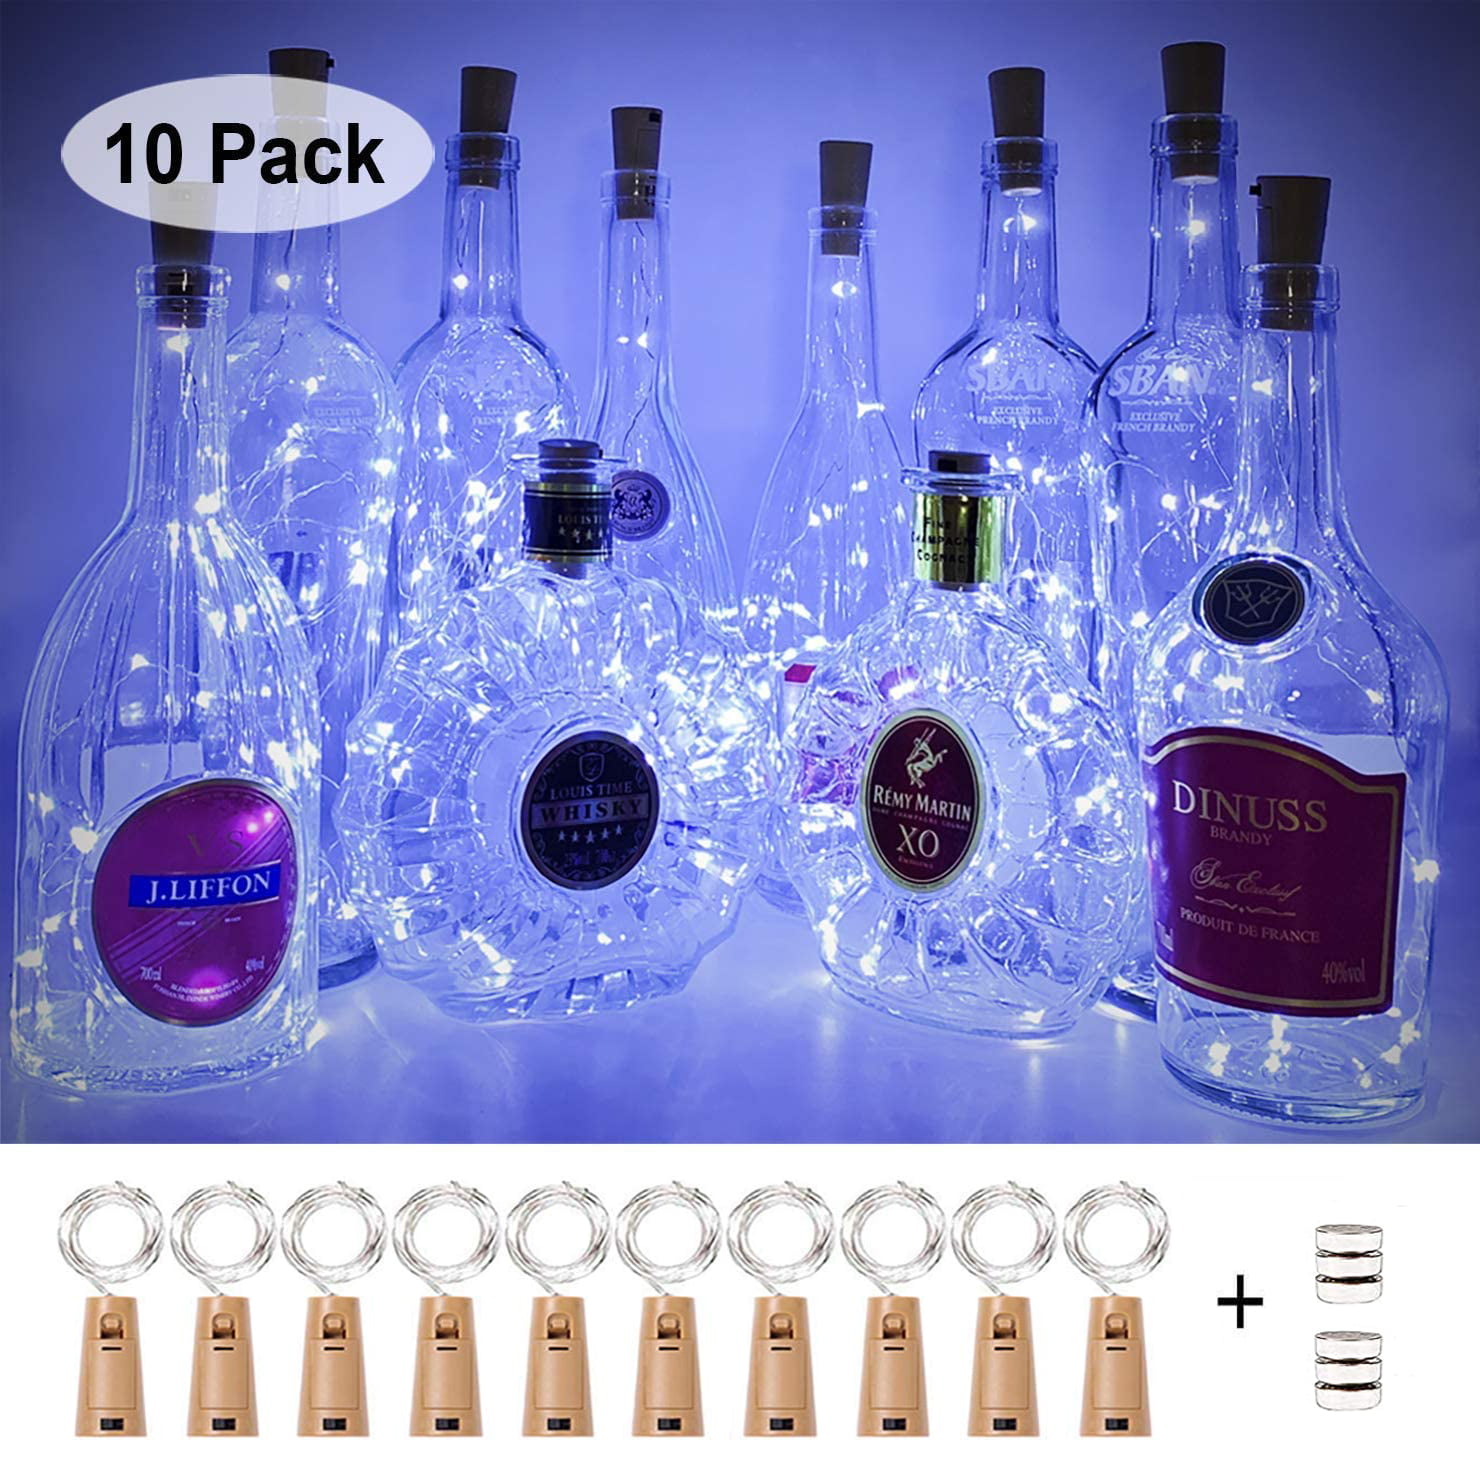 Details about   20LED Copper Wire Winte Bottle Cork String Lights Fairy Xmas Wedding Party Decor 